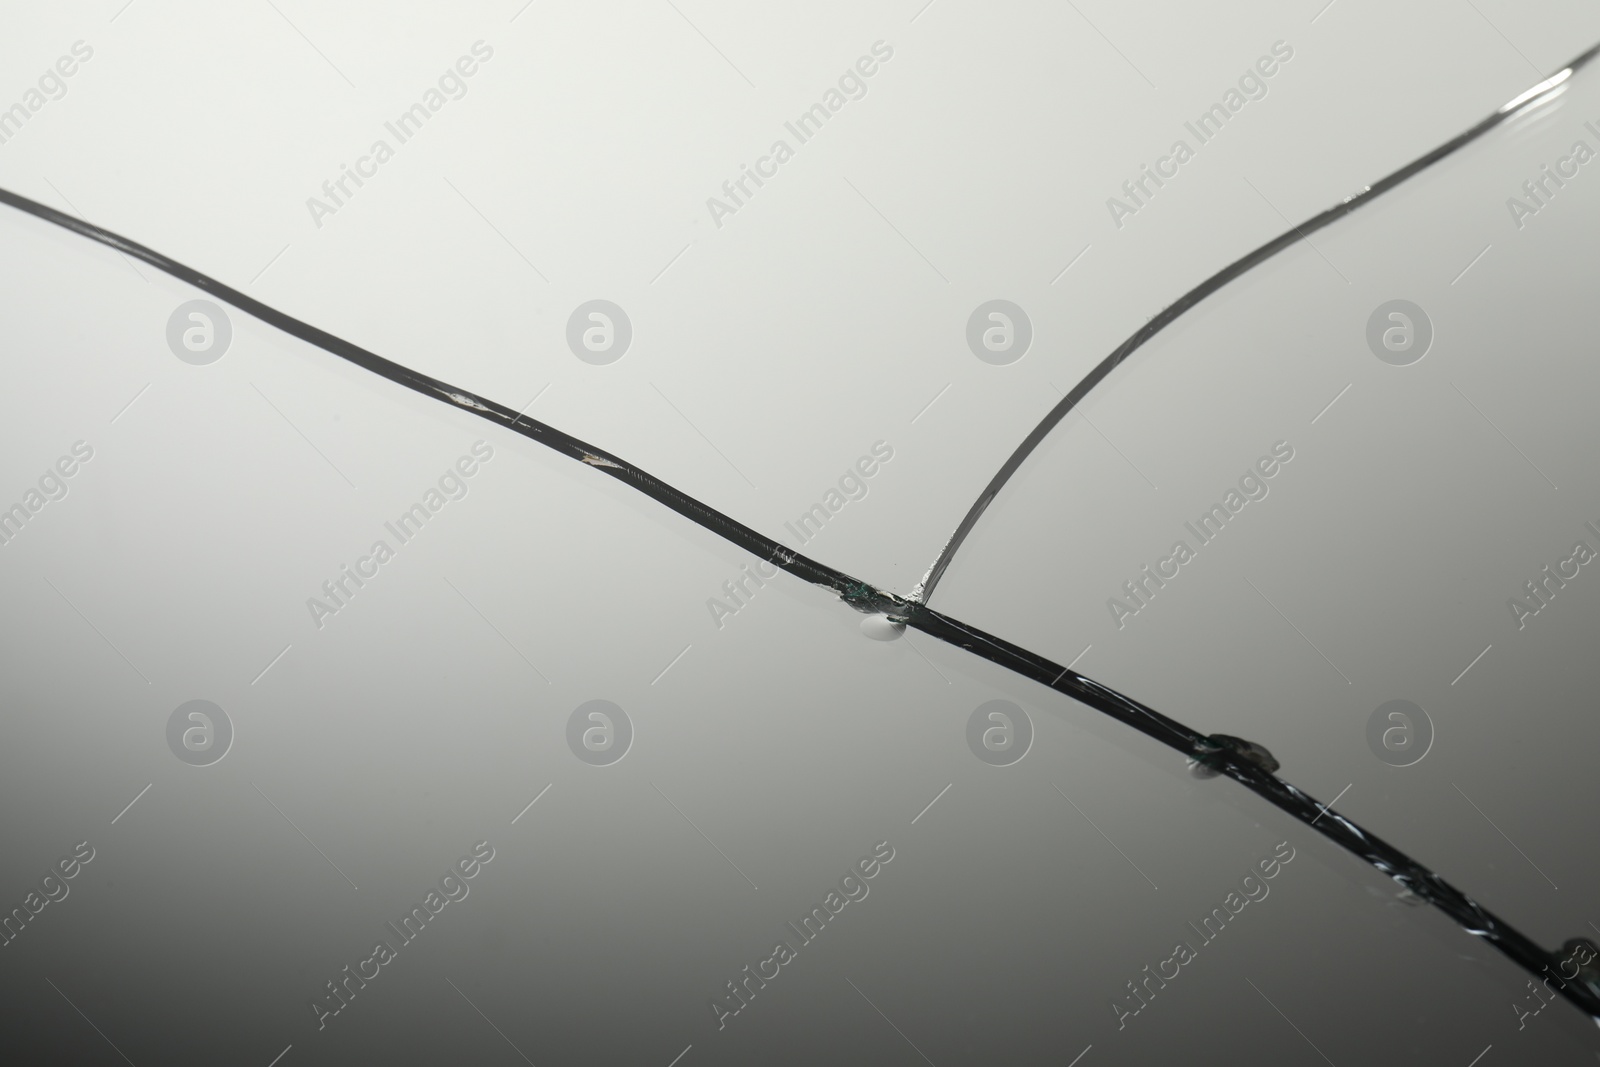 Photo of Broken mirror with large cracks as background, closeup view